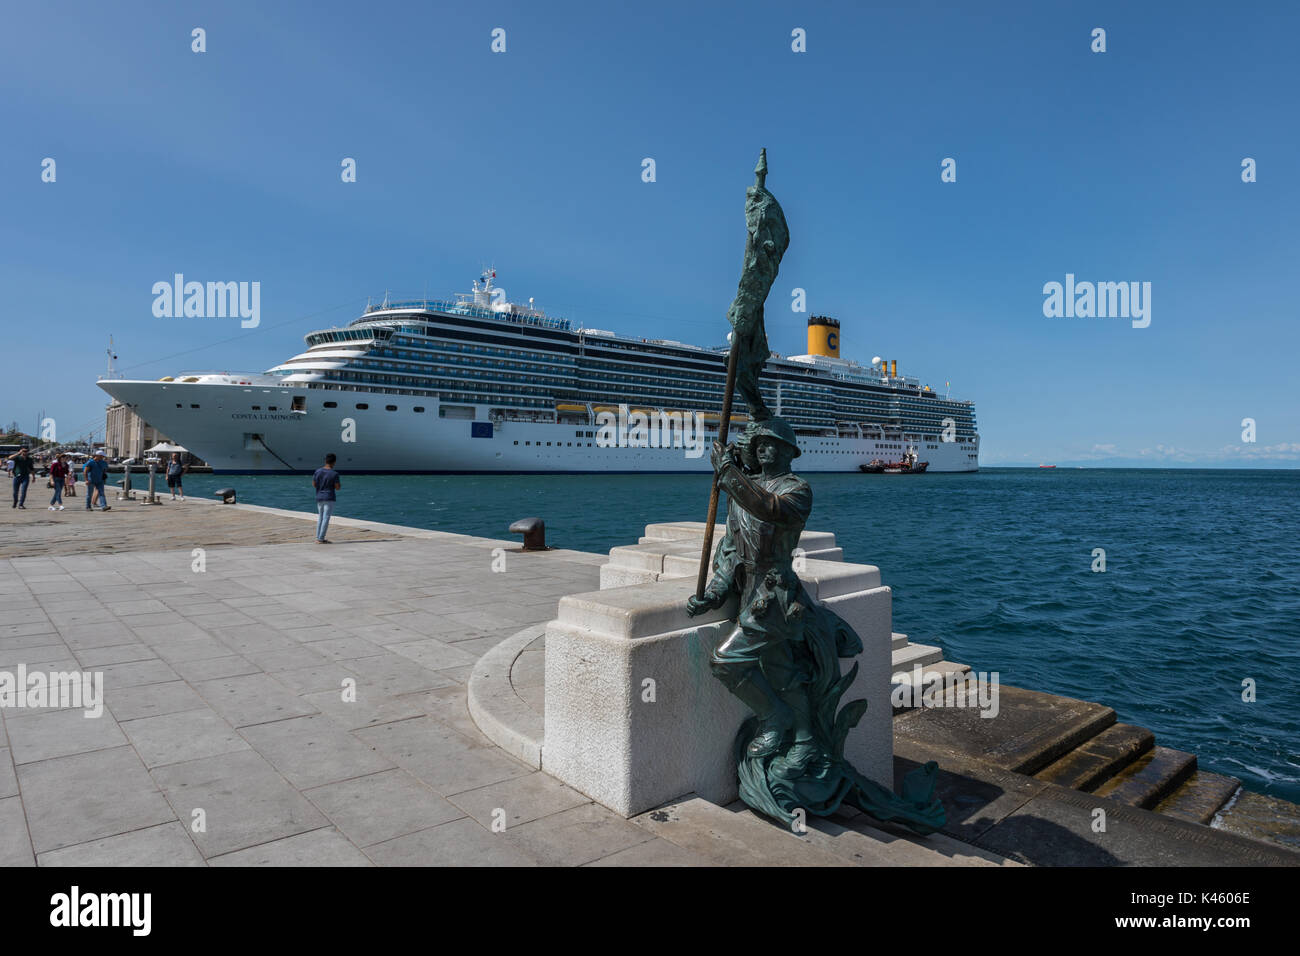 Statue of Bersaglieri soldier in Trieste, Italy with the Costa Luminosa luxury cruise ship in the background Stock Photo